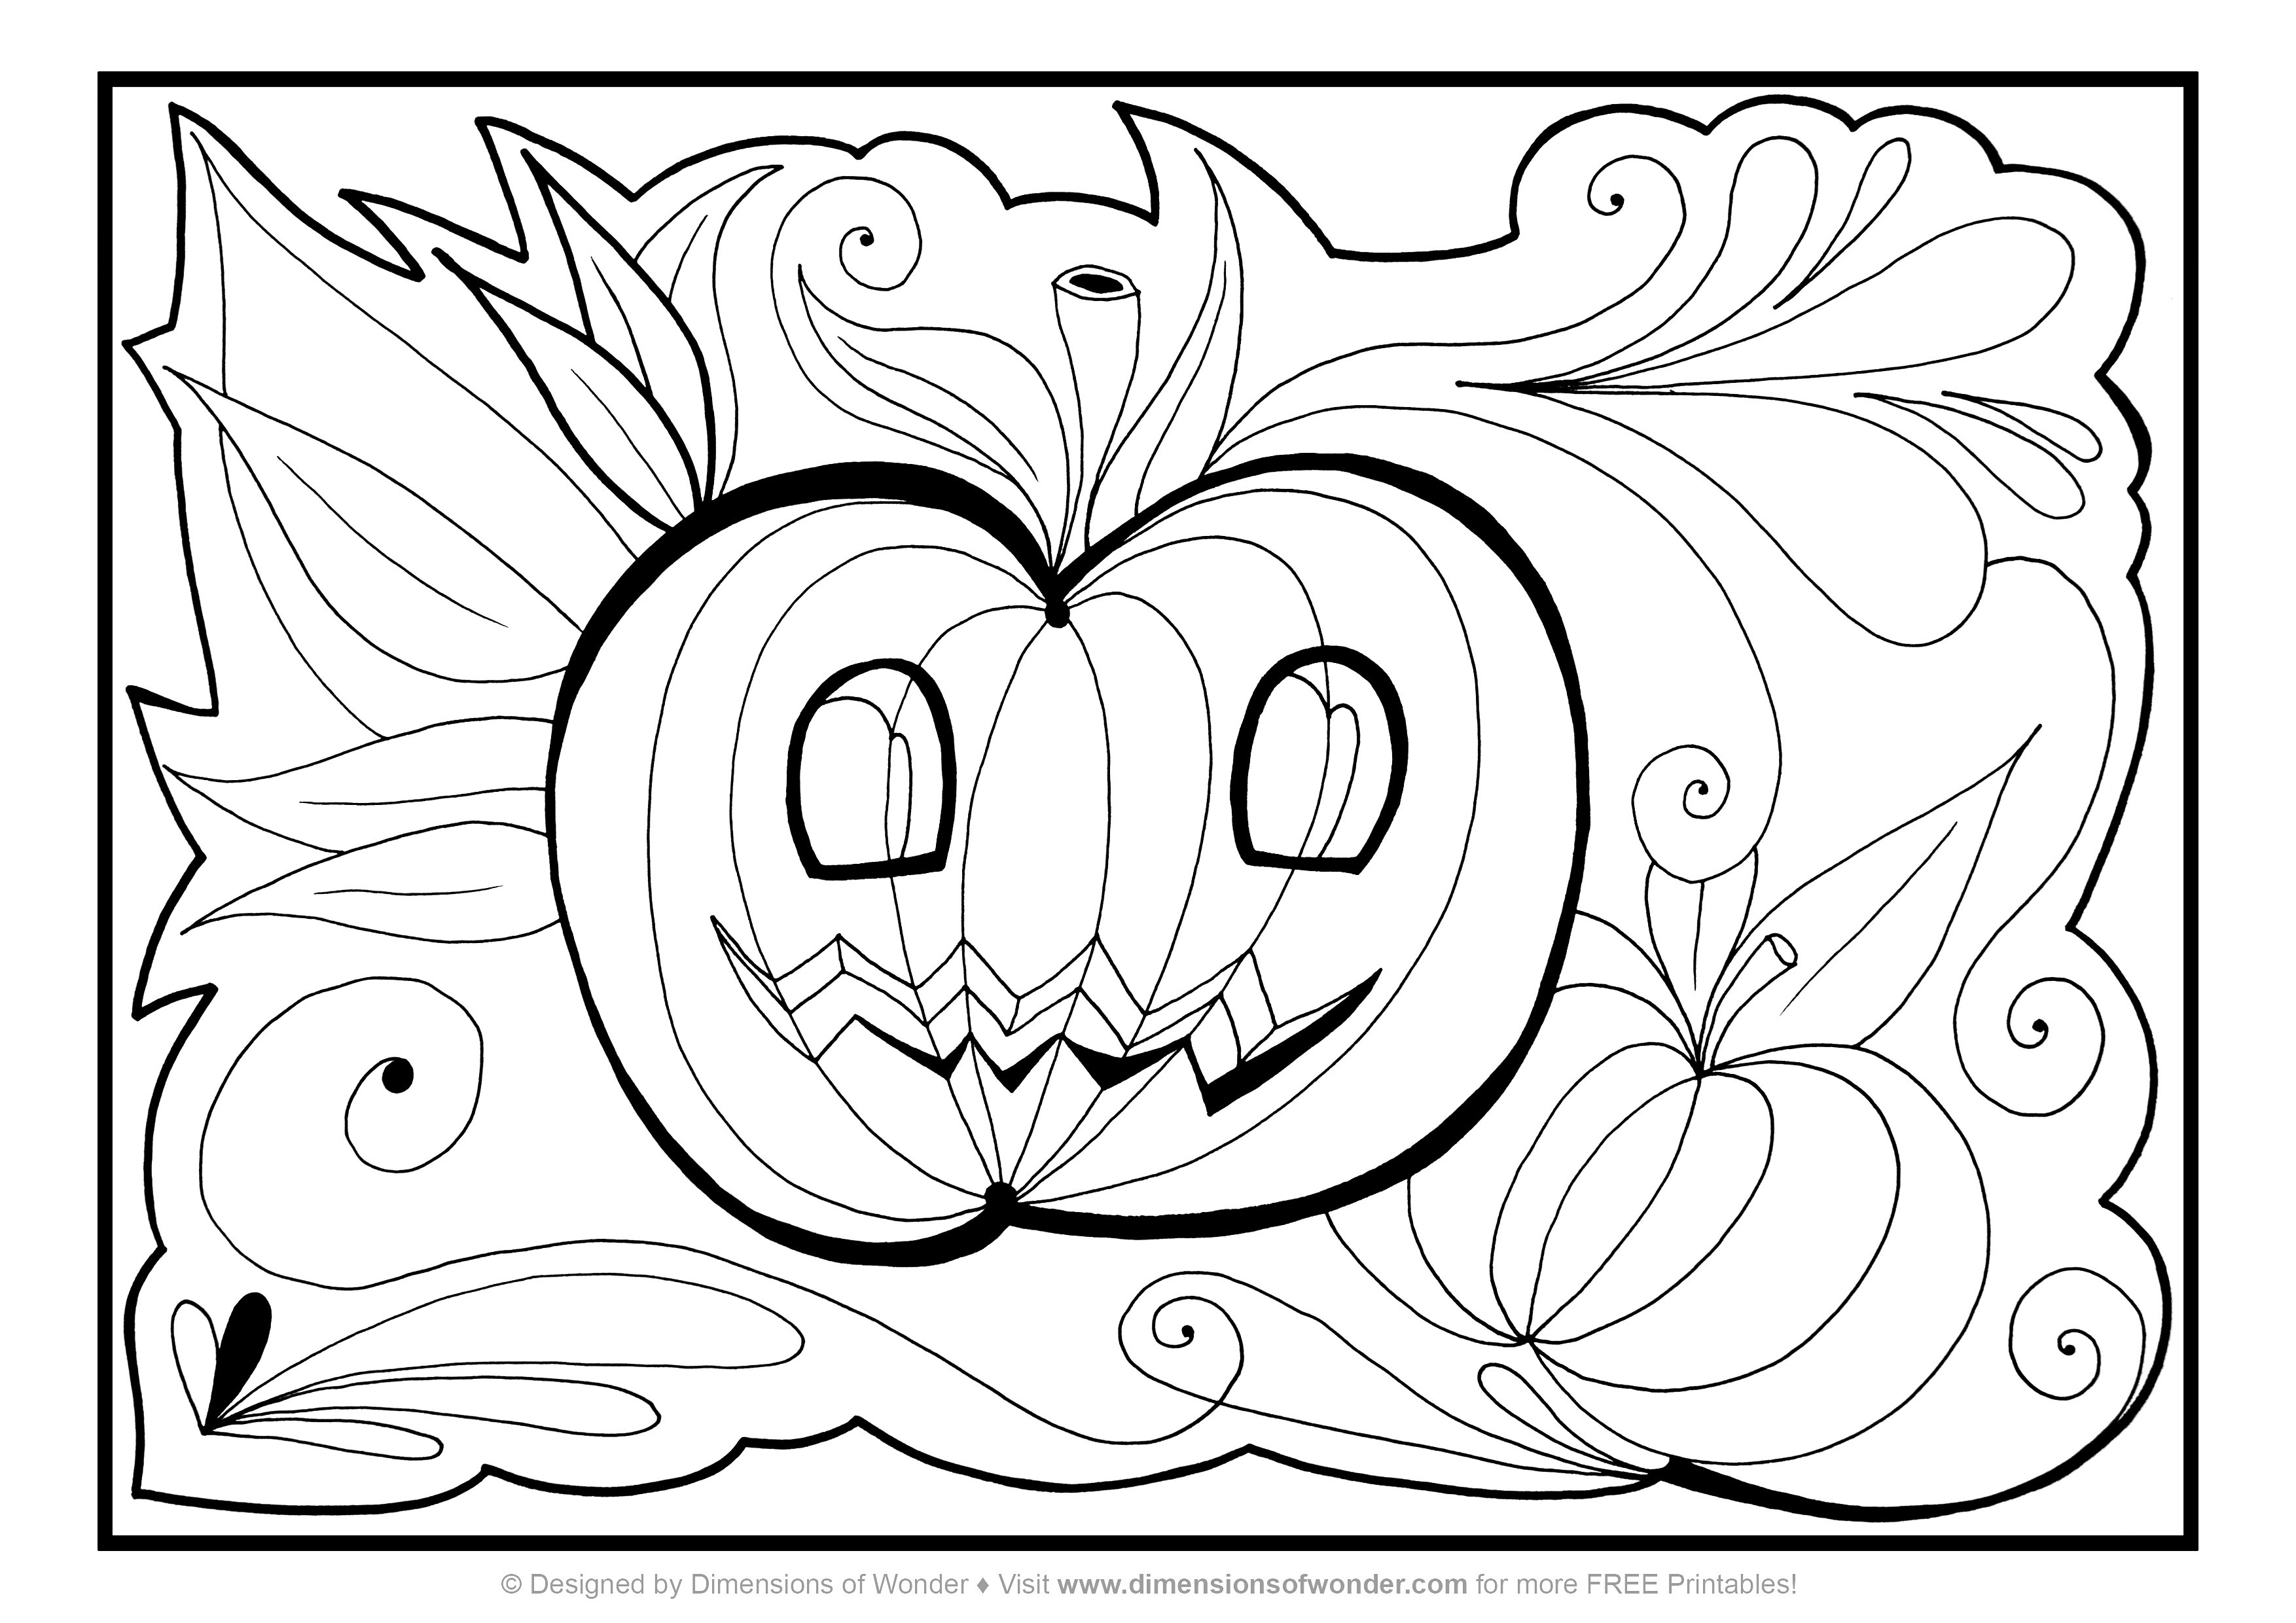 Halloween Coloring Pages Pdf at GetDrawings.com | Free for personal use